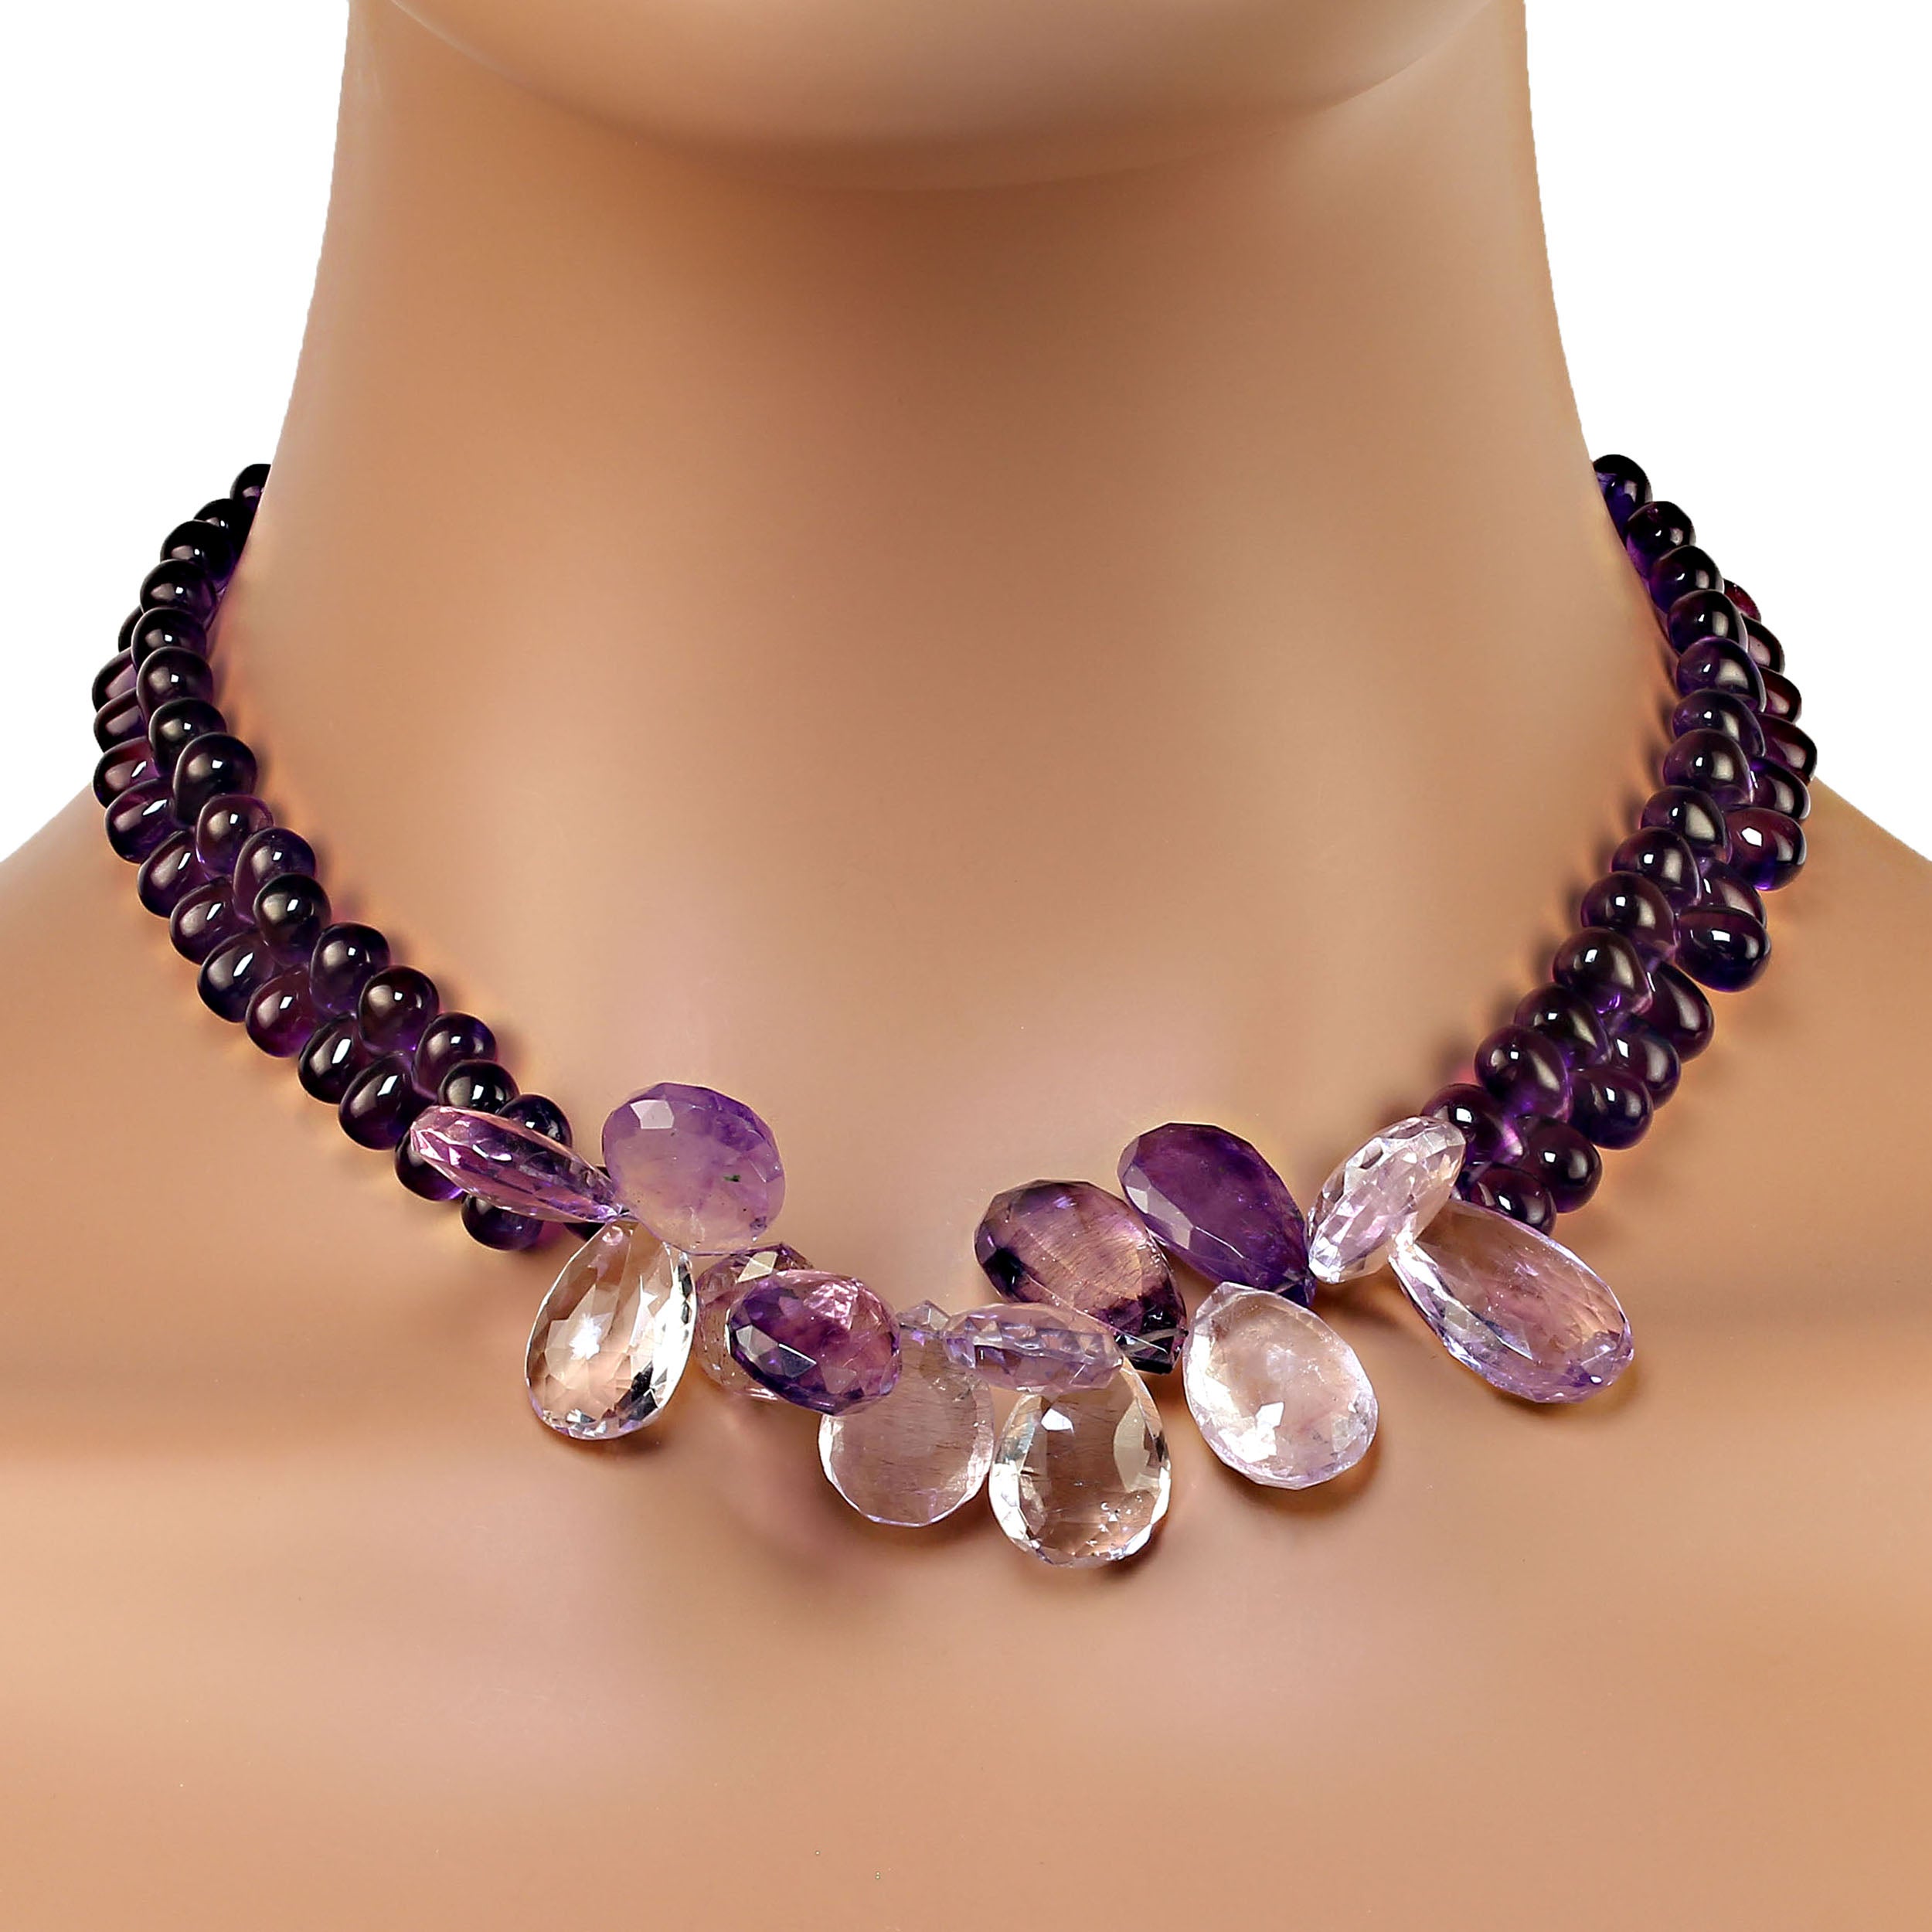 AJD Unique and Exquisite Amethyst 17 Inch necklace  Great February Gift! For Sale